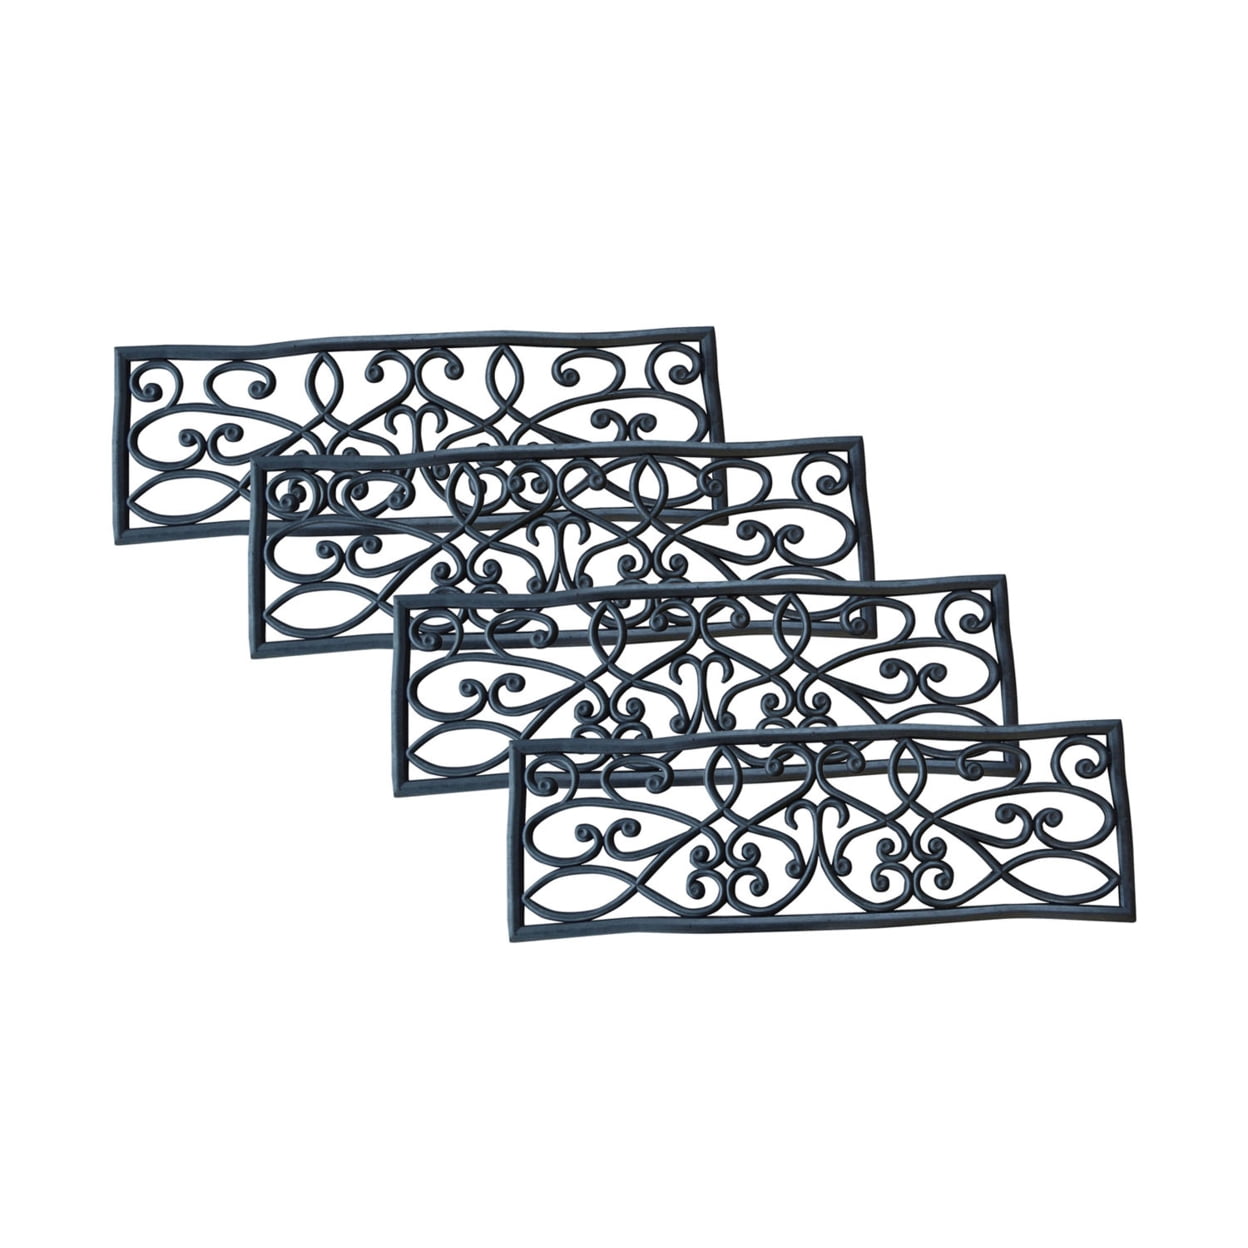 Stm9304pk Rubber Scrollwork Stair Tread, Pack Of 4